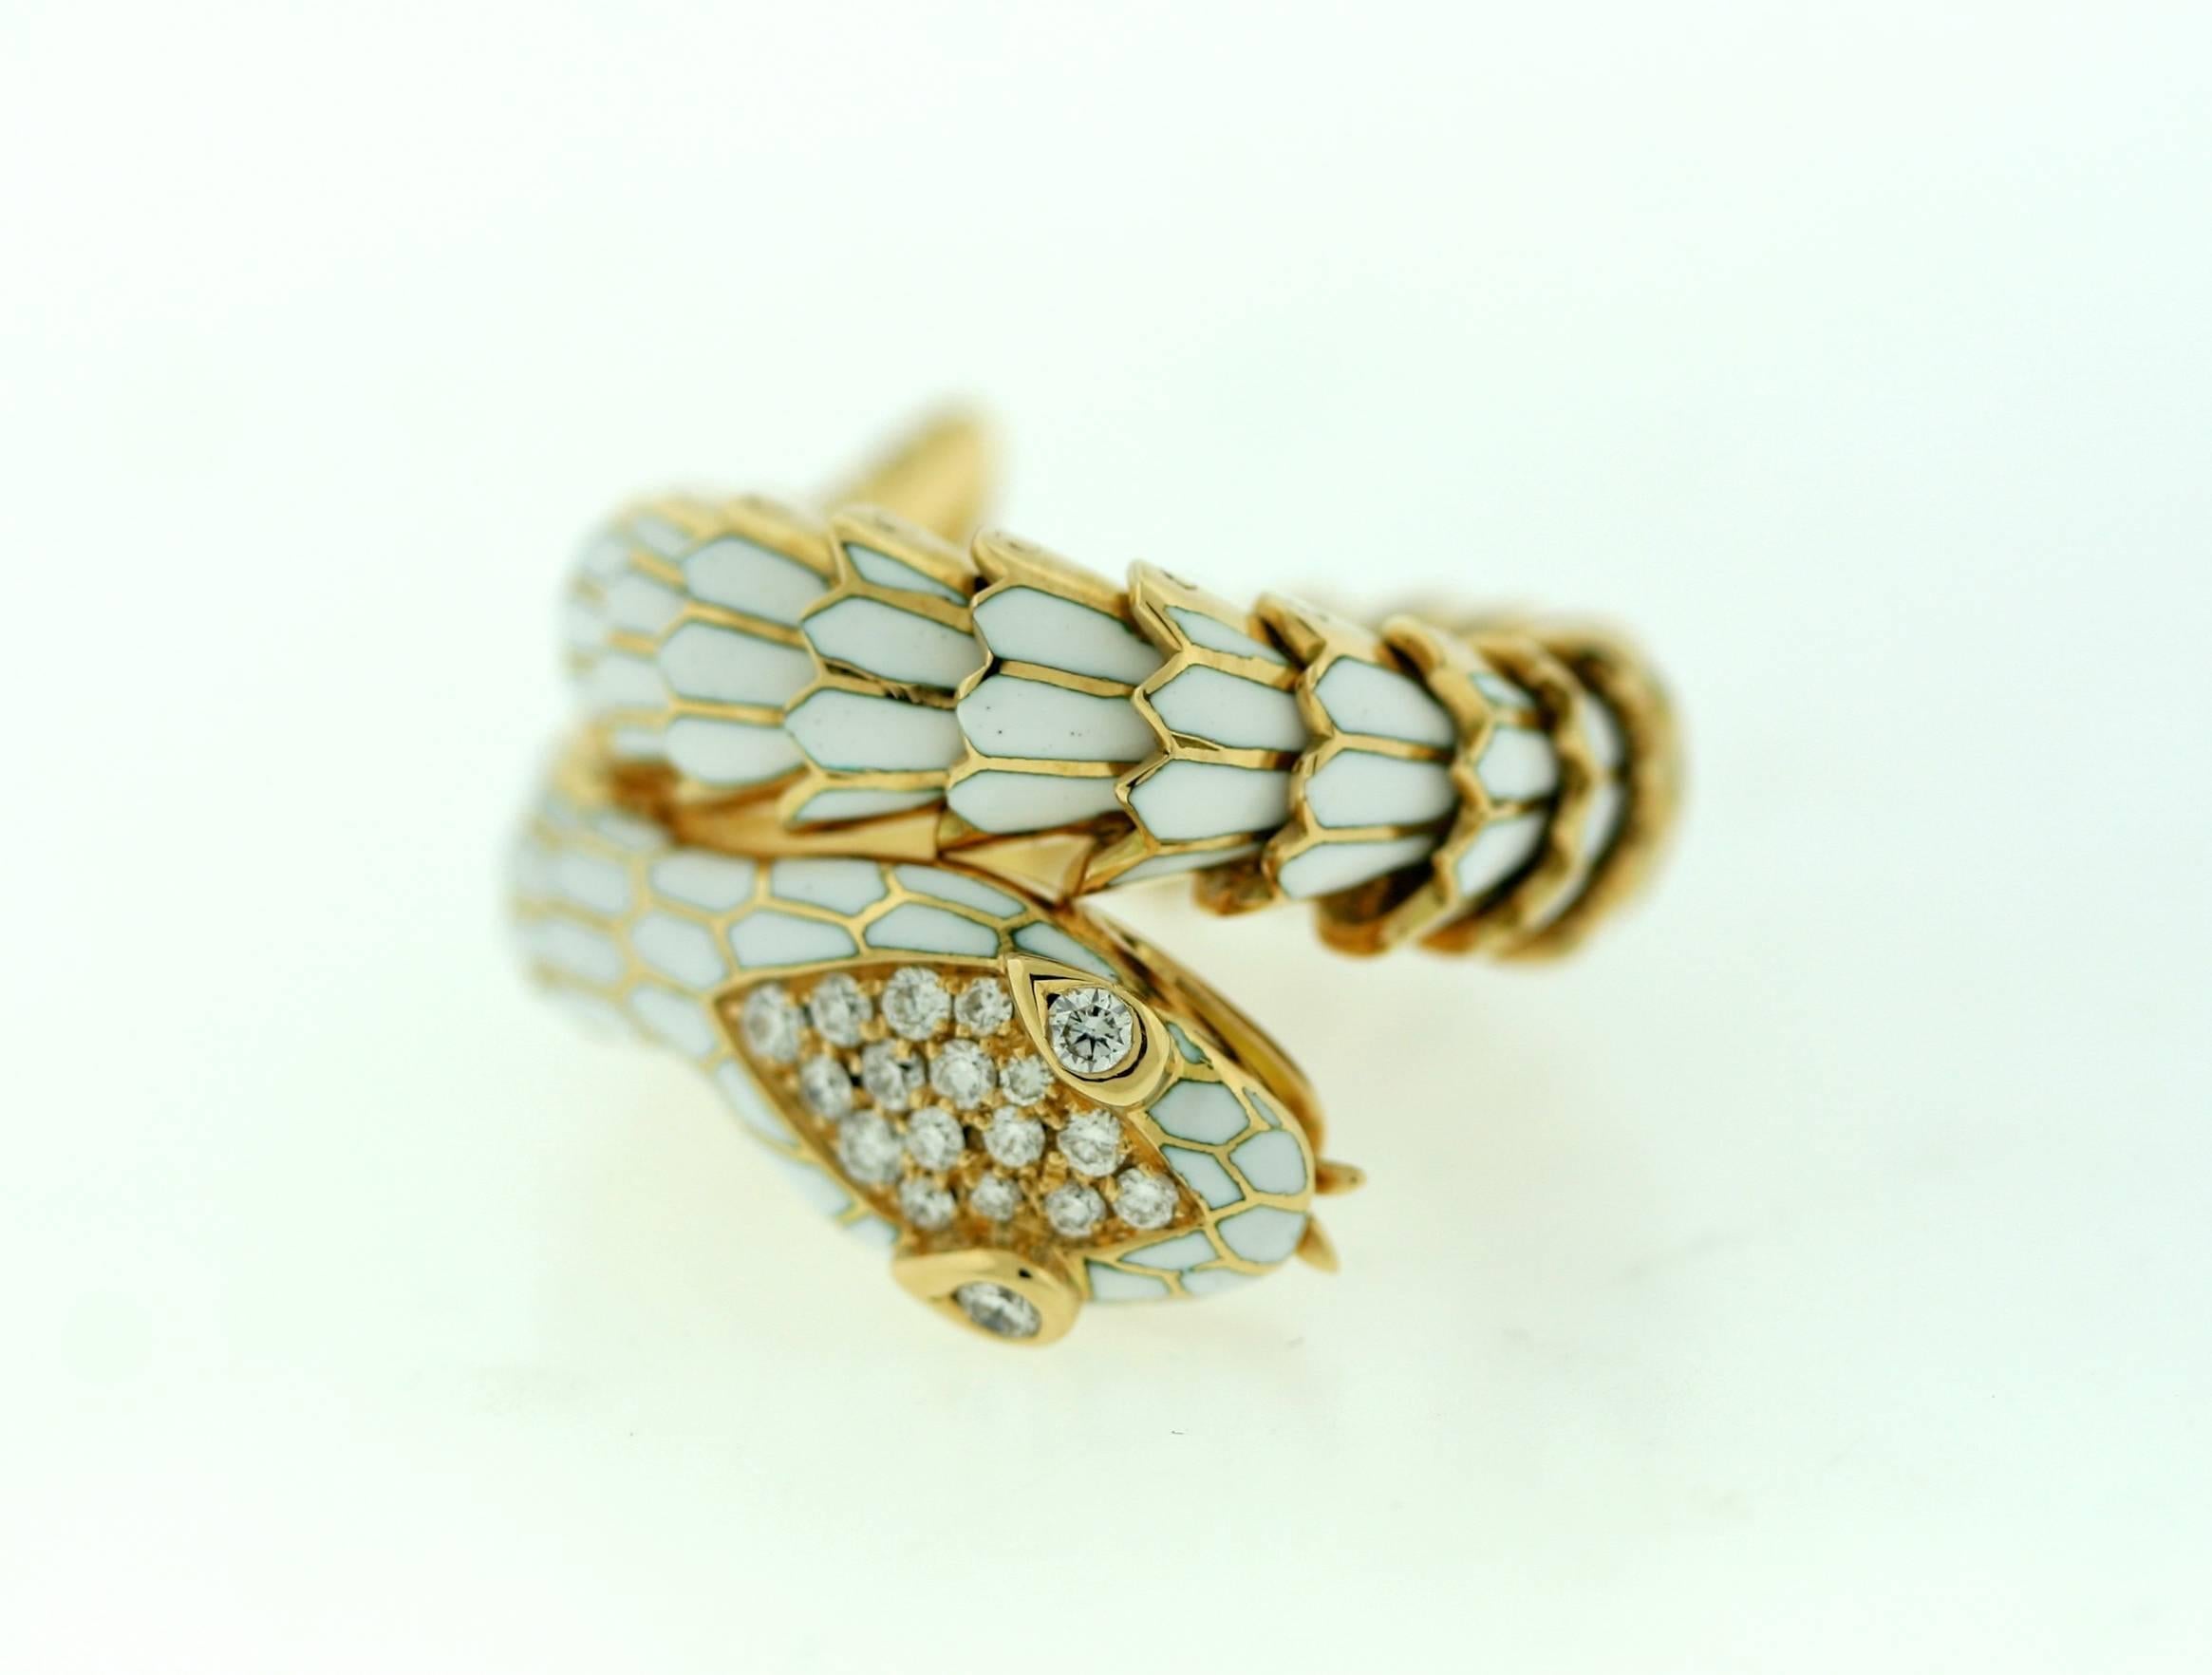 Illario 18k gold white enamel coiled serpent ring with pave set diamond head and tail. Size is flexible as ring has a tension coil. Circa 1970s.